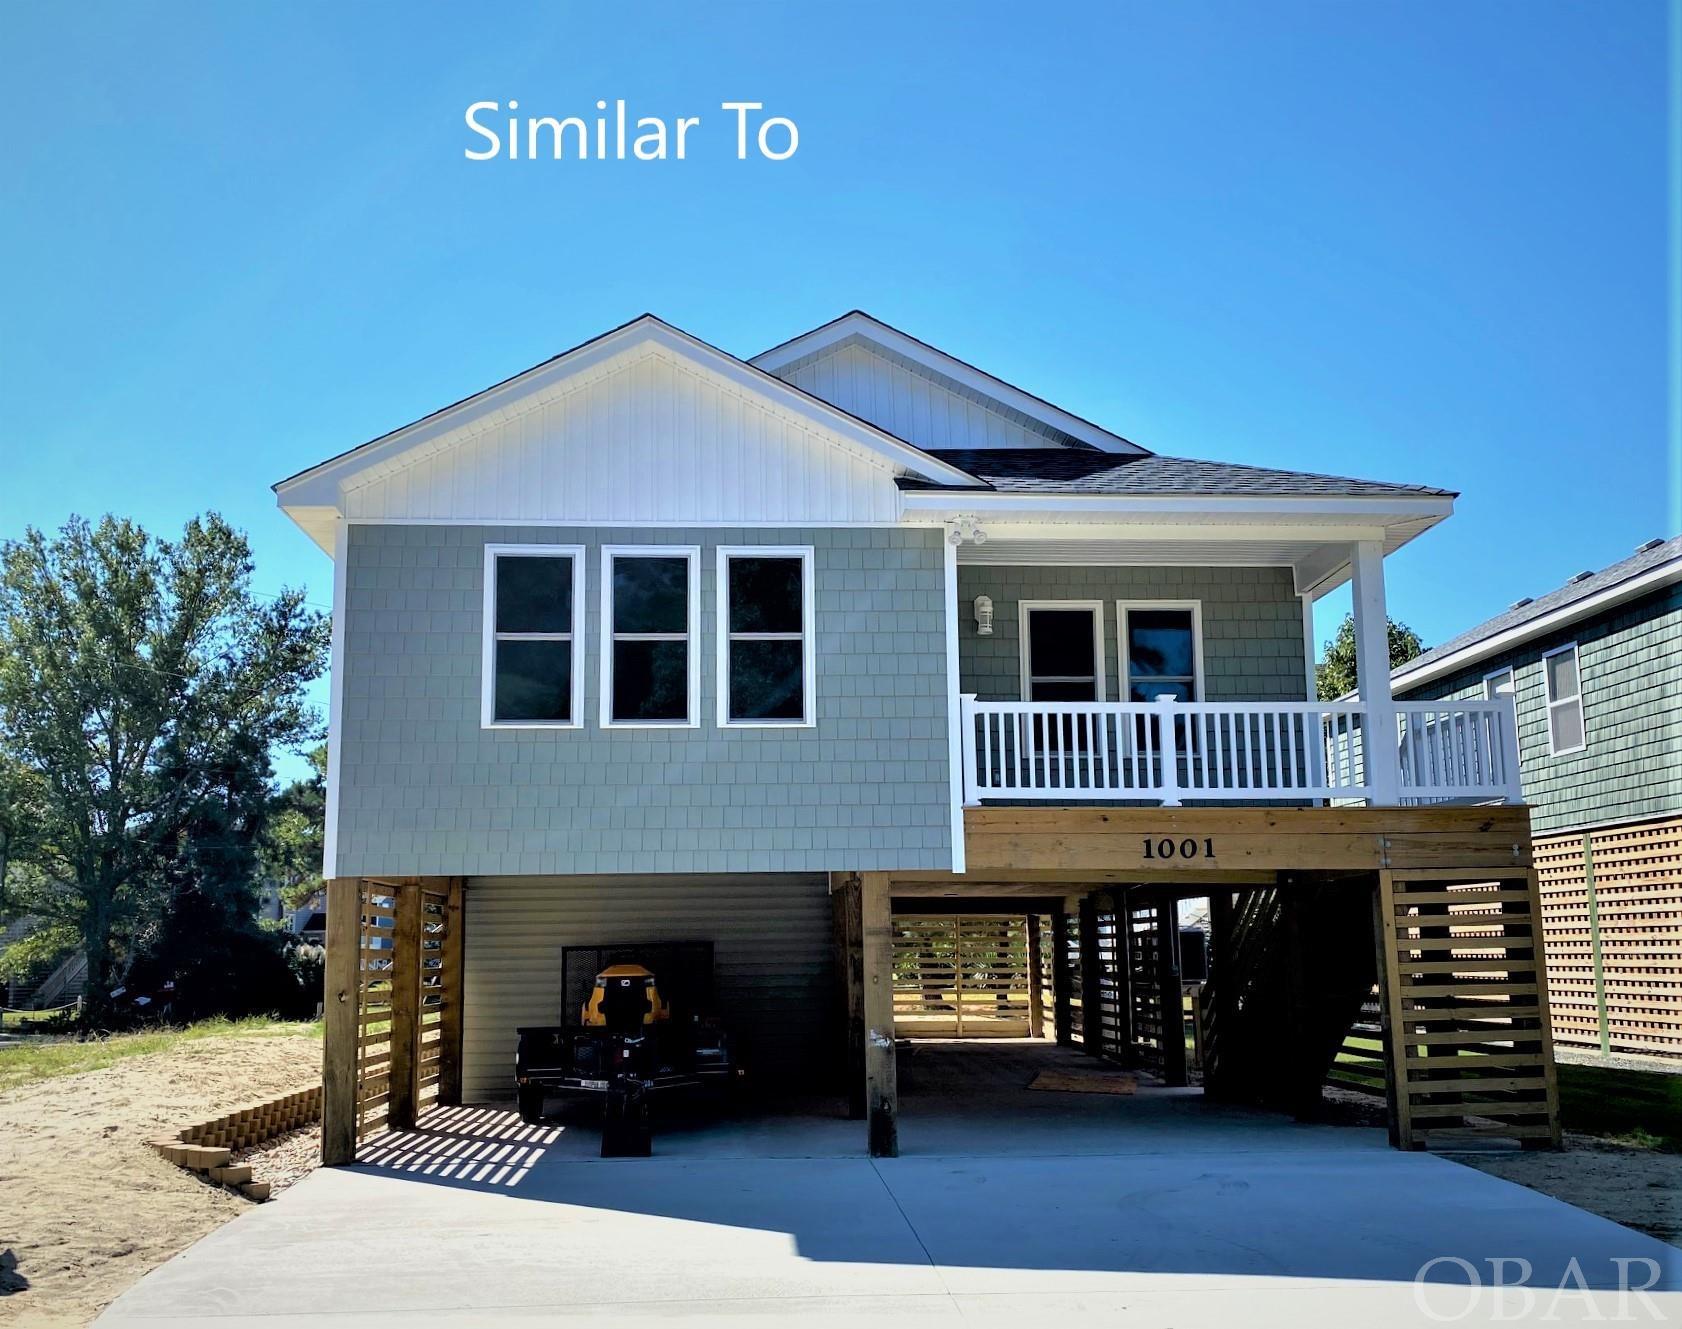 114 Roanoke Drive lot 102 Outer Banks Home Listings - Holleay Parcker - Spinnaker Realty Outer Banks (OBX) Real Estate